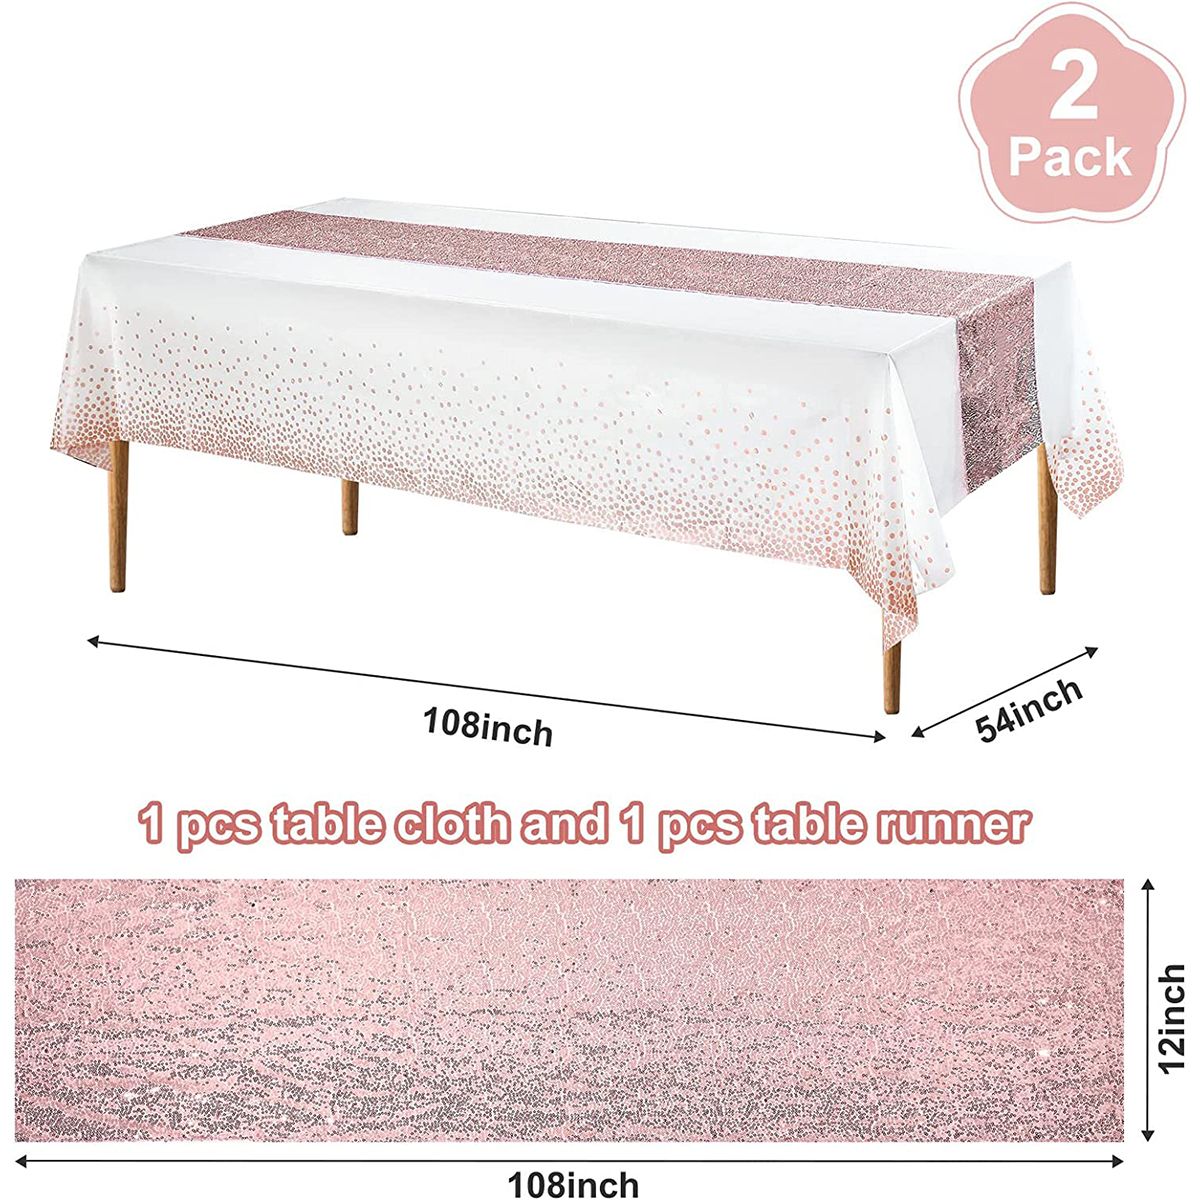 

2pcs Tablecloth with Sequins Doily Set Polka Dot Glitter Decoration Birthday Wedding Anniversary Party Supplies